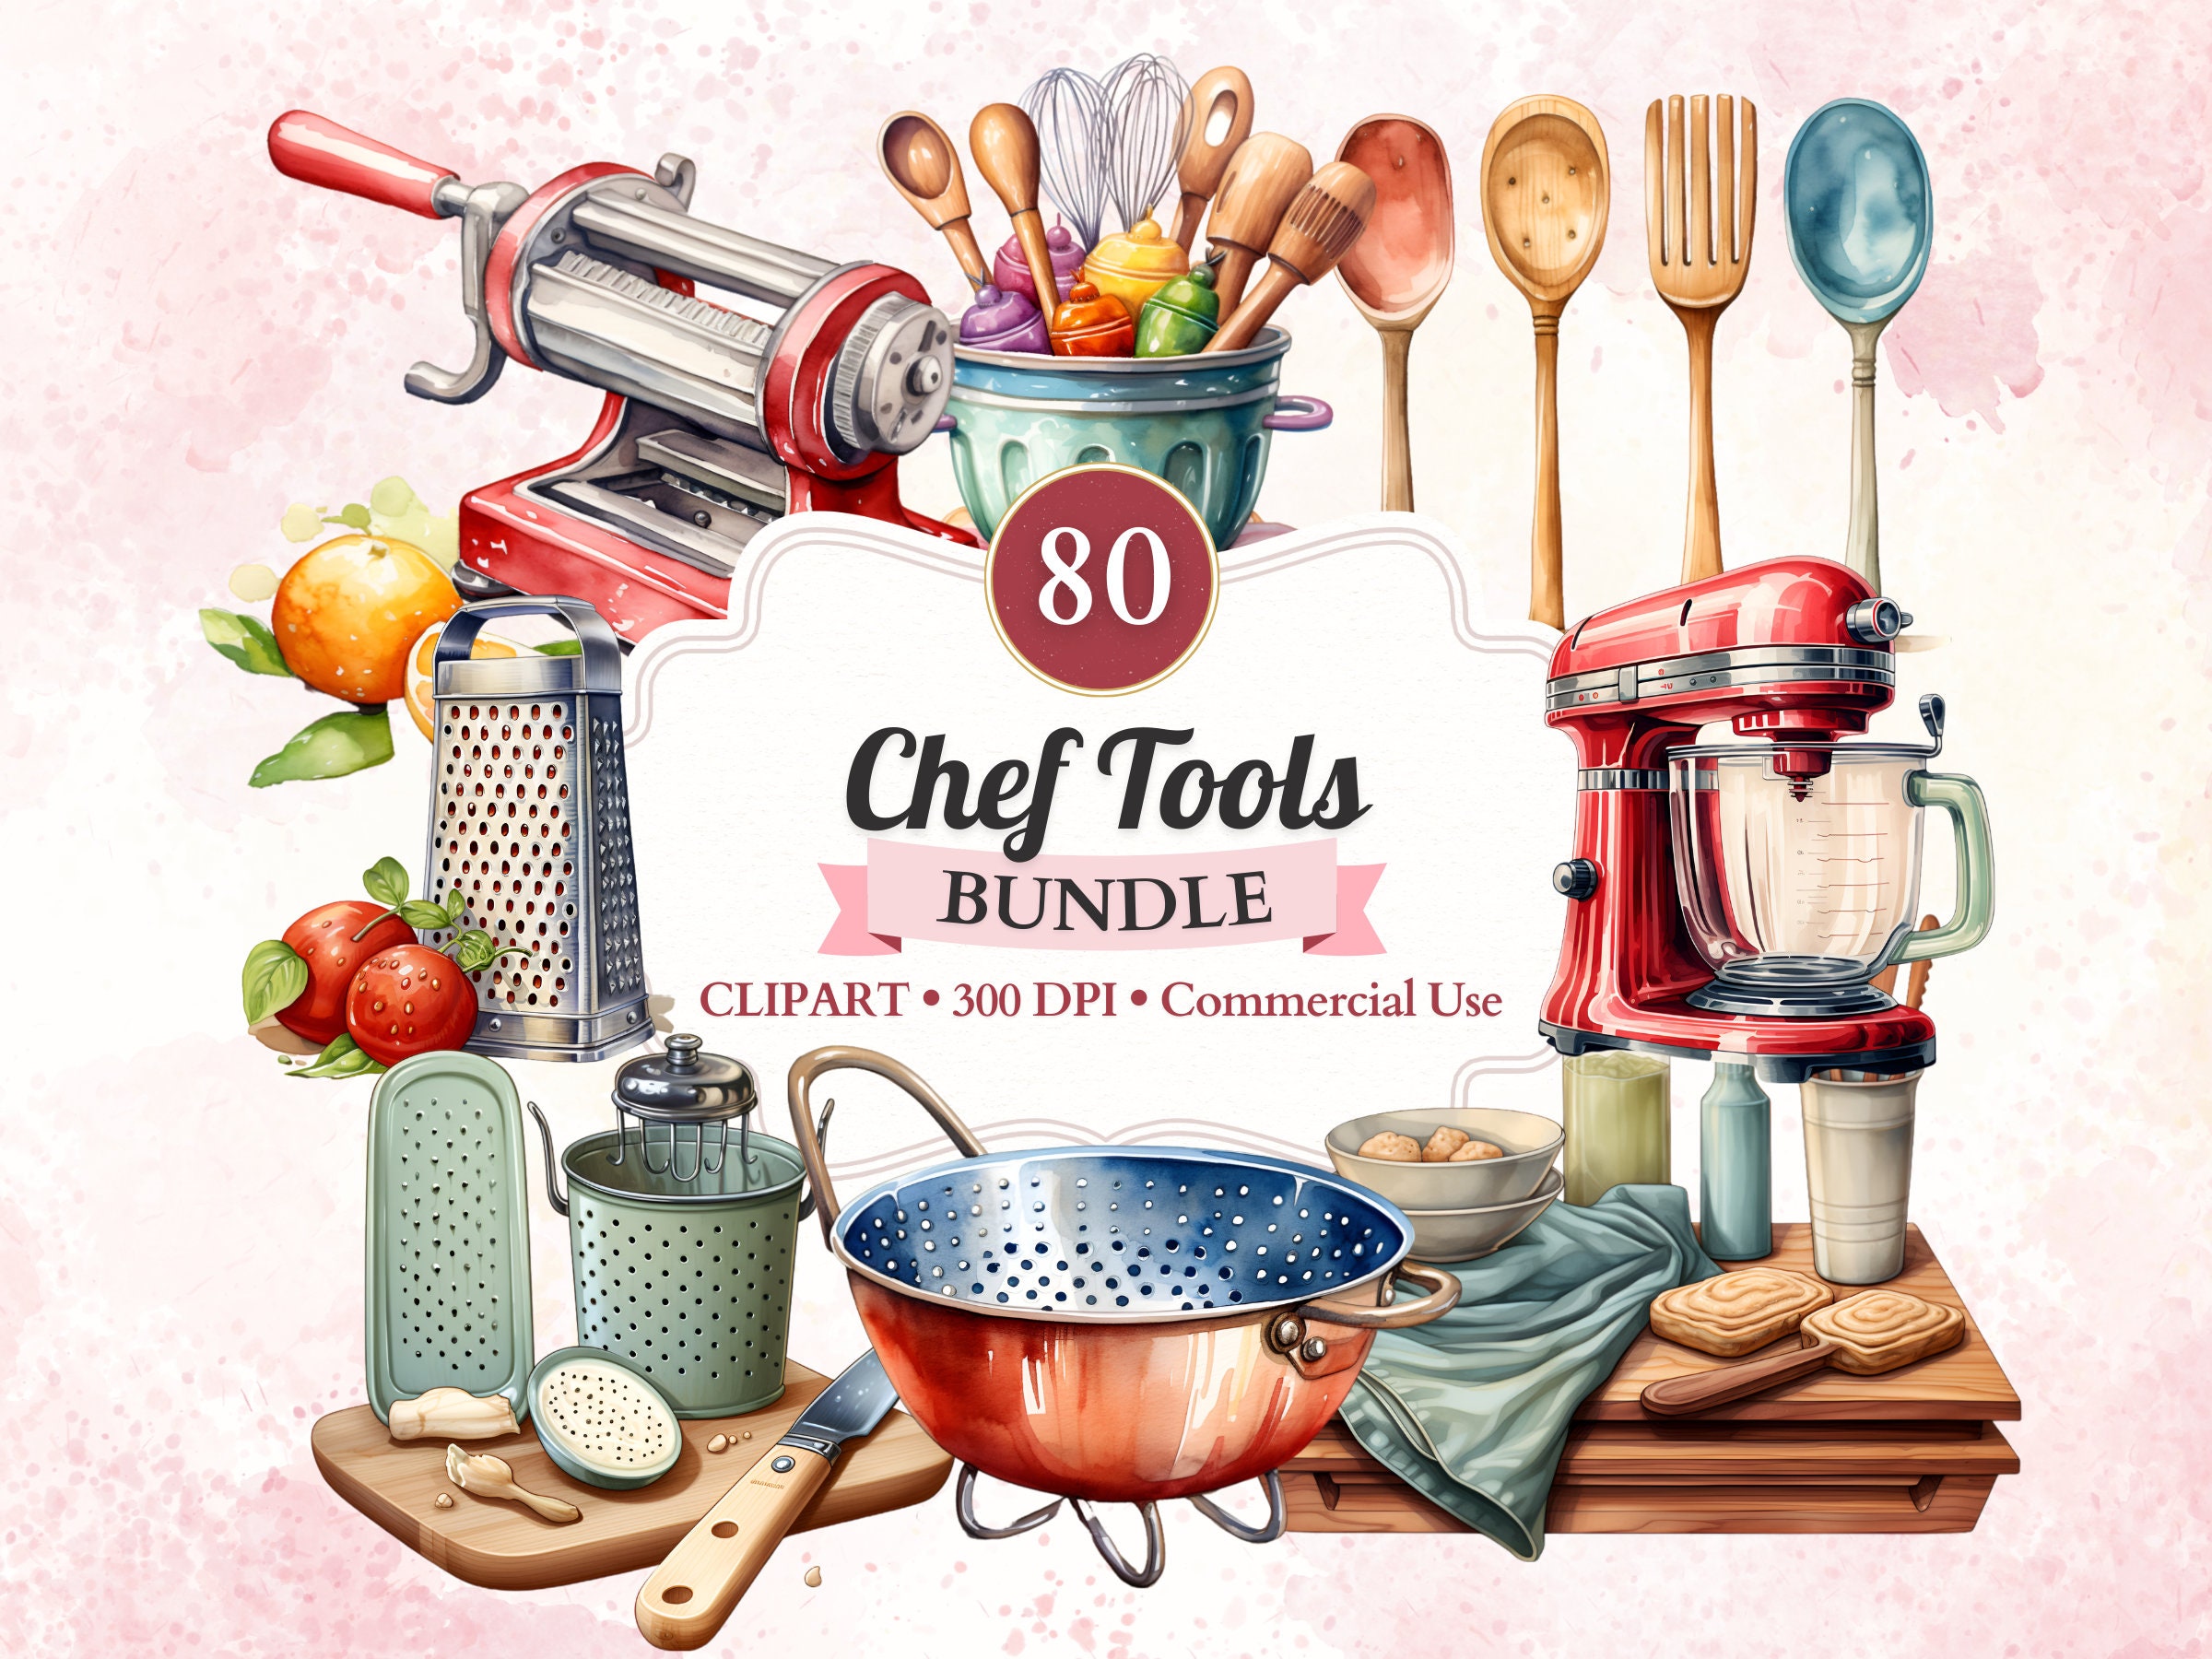 Kitchen Tools Clipart, Kitchenware Equipment, Cooking Tool Utensil, Cooking  Kitchen Accessories, Commercial Use 